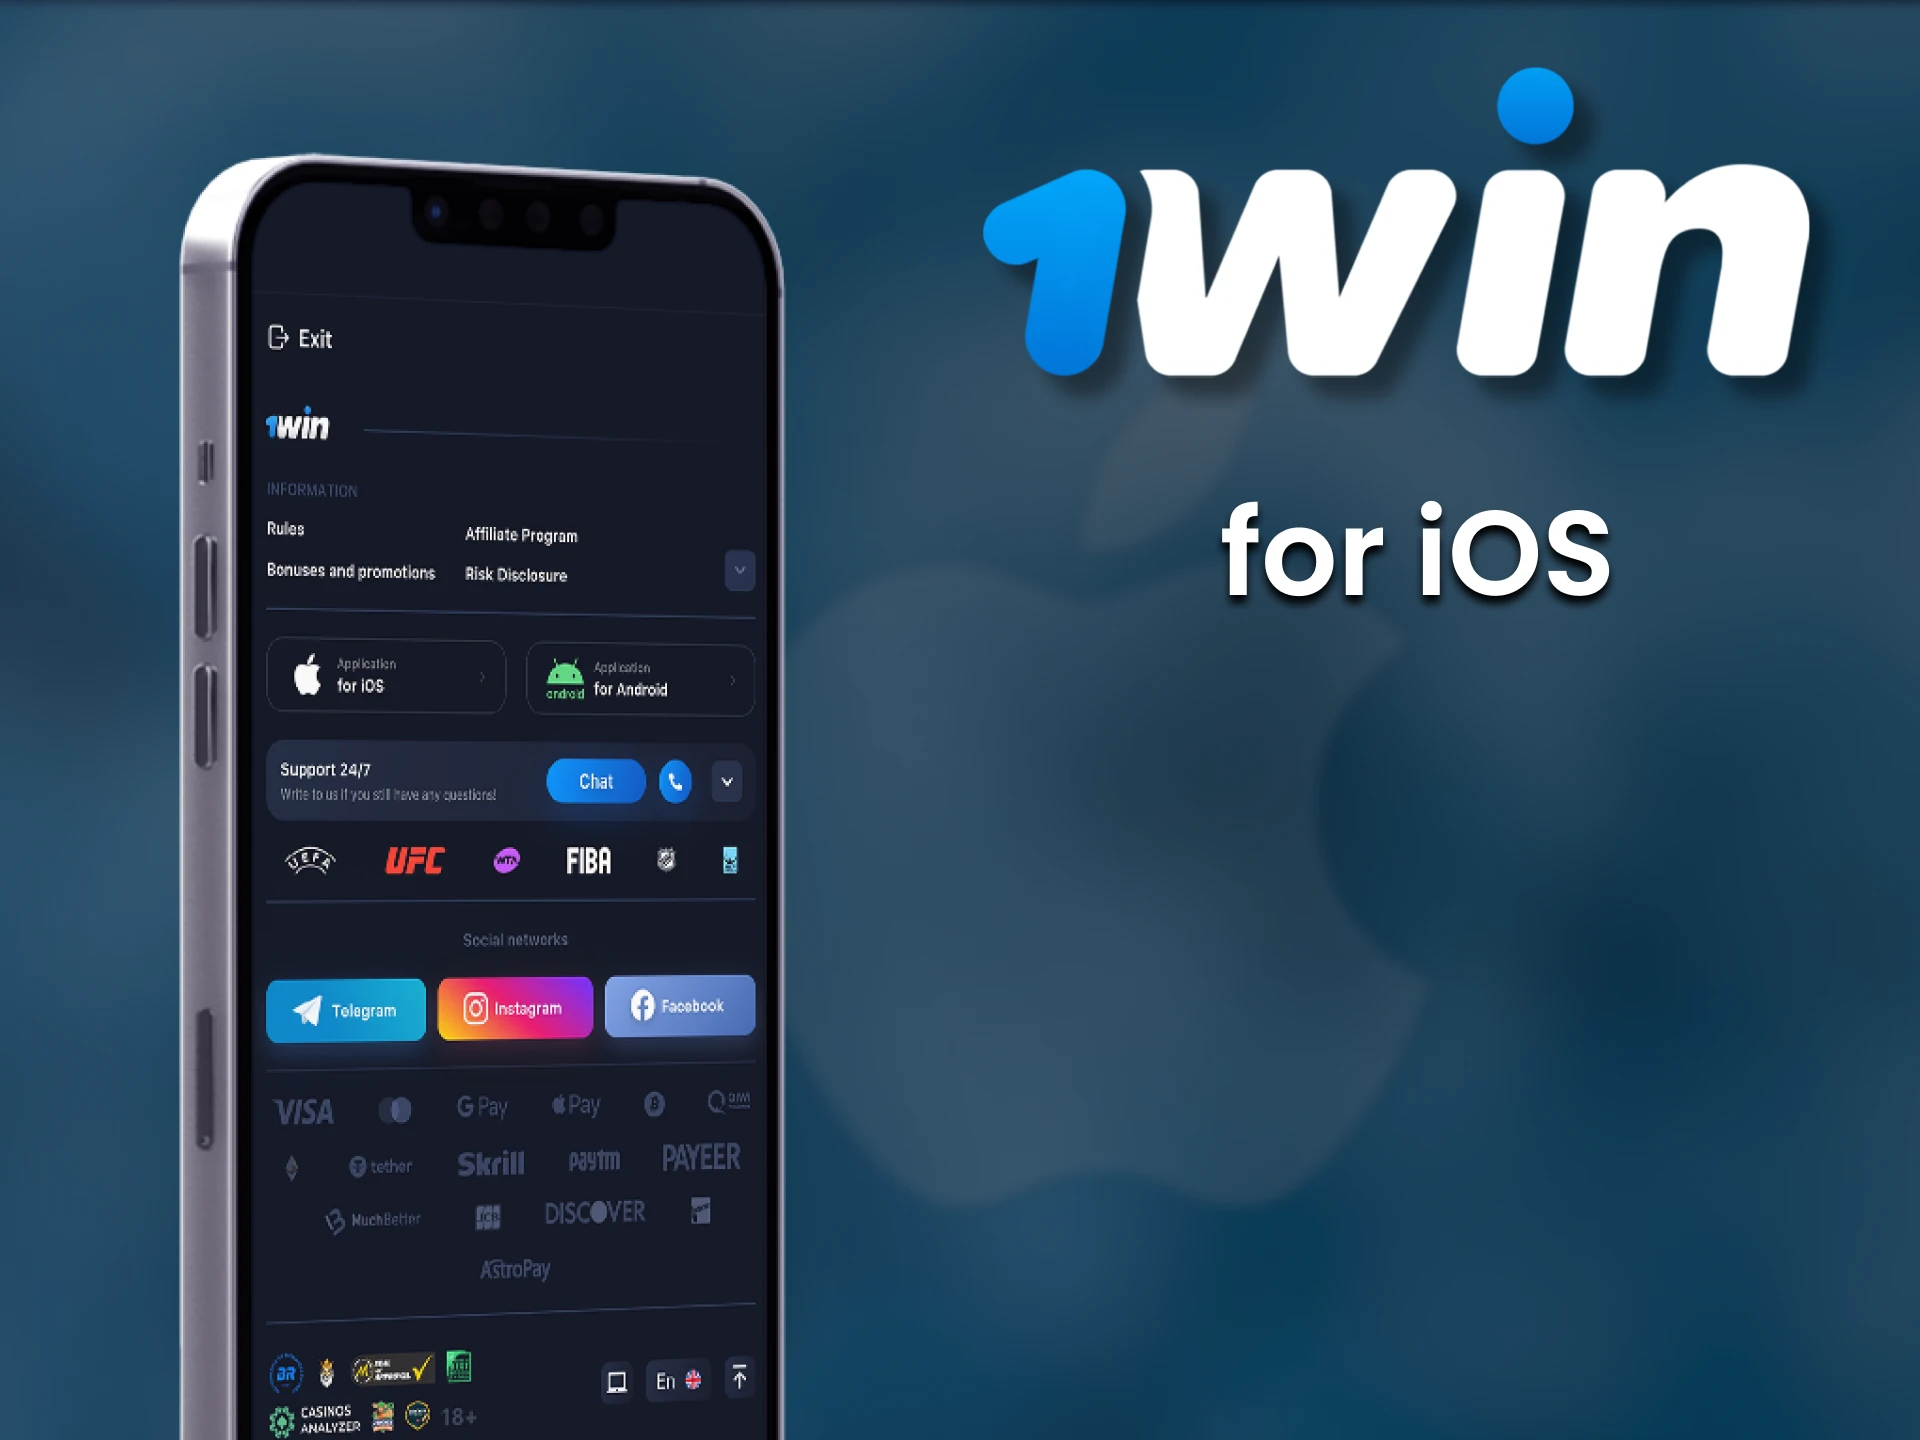 Install the 1win application on your iOS device.